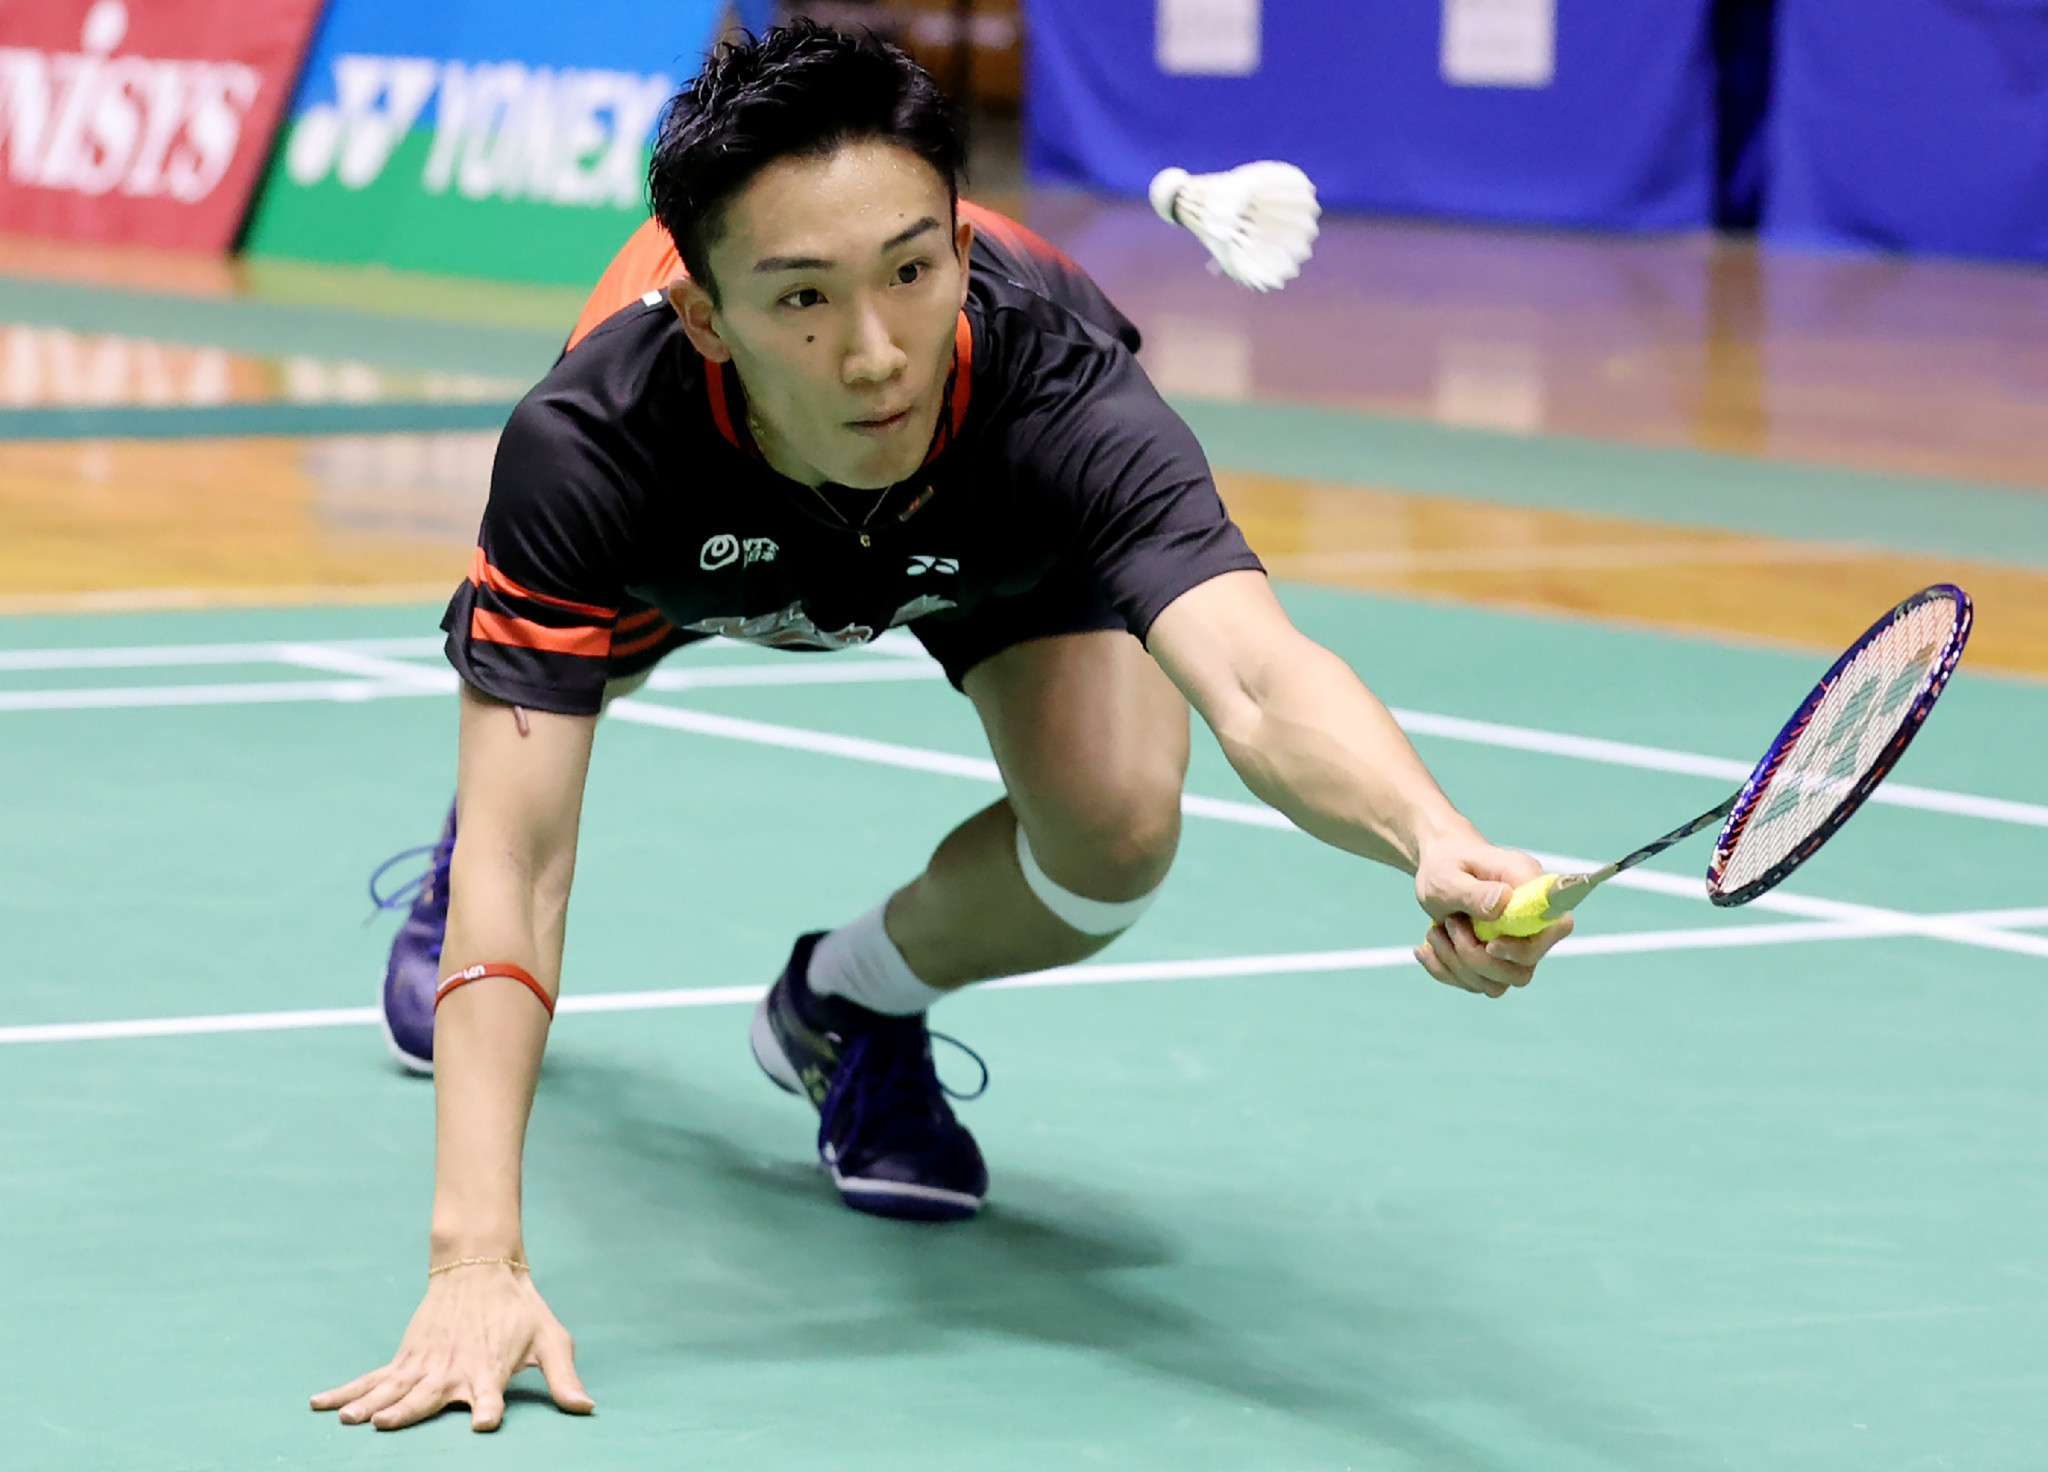 Kento Momota of Japan won the men's singles title at the Badminton Asia Championships in Wuhan in 2019 ©Getty Images